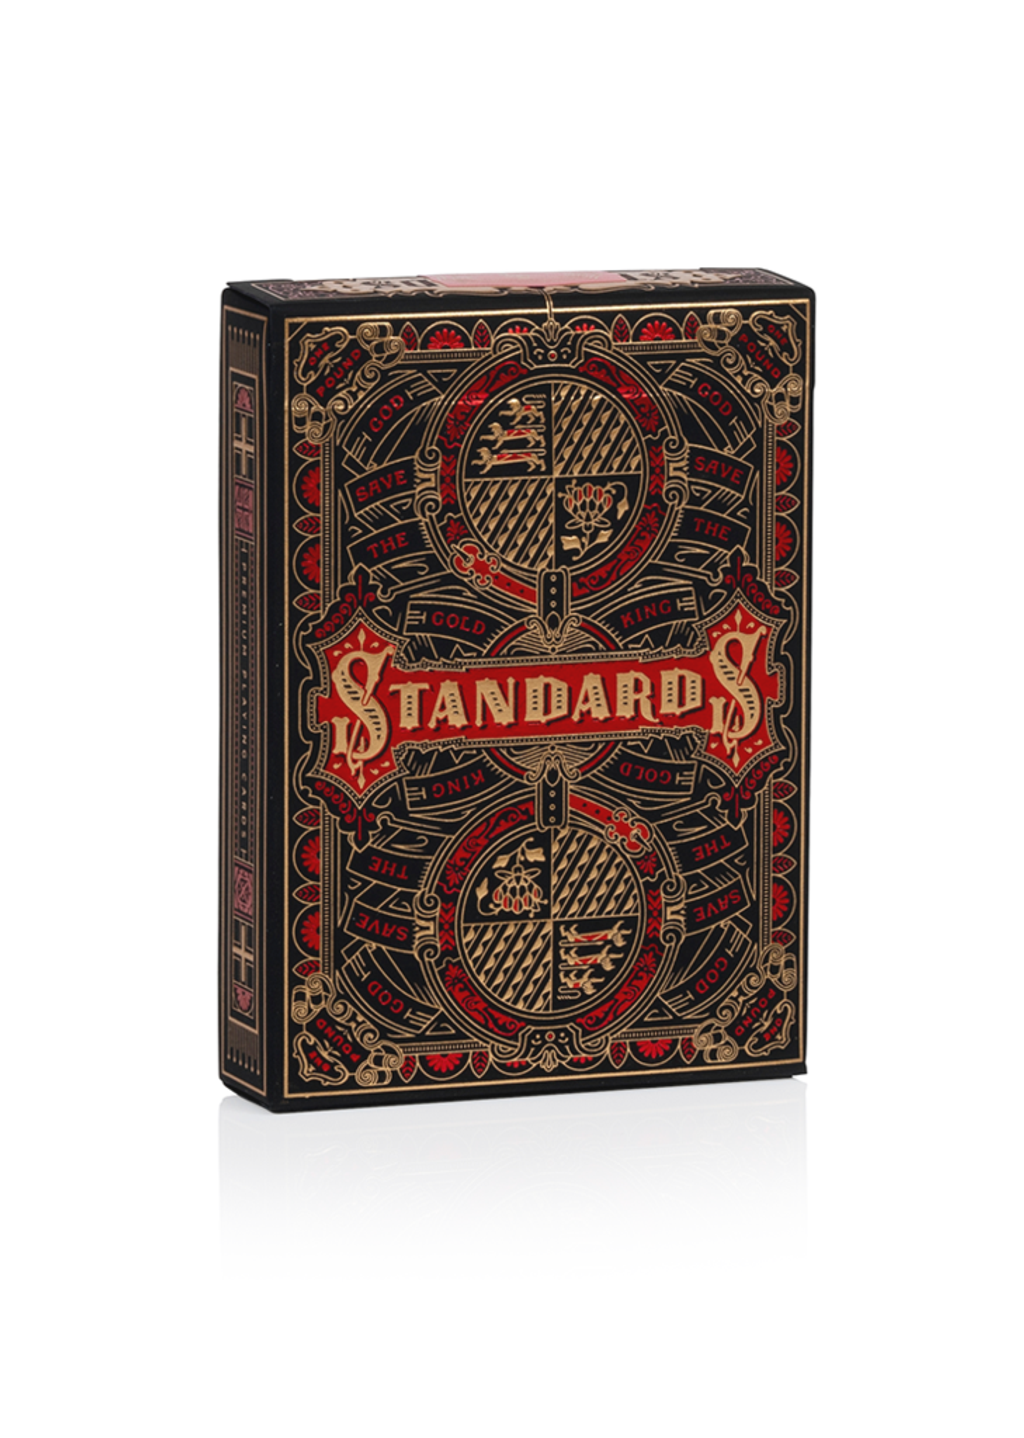 gold-standards-playing-cards-black-back_1024x1024.png